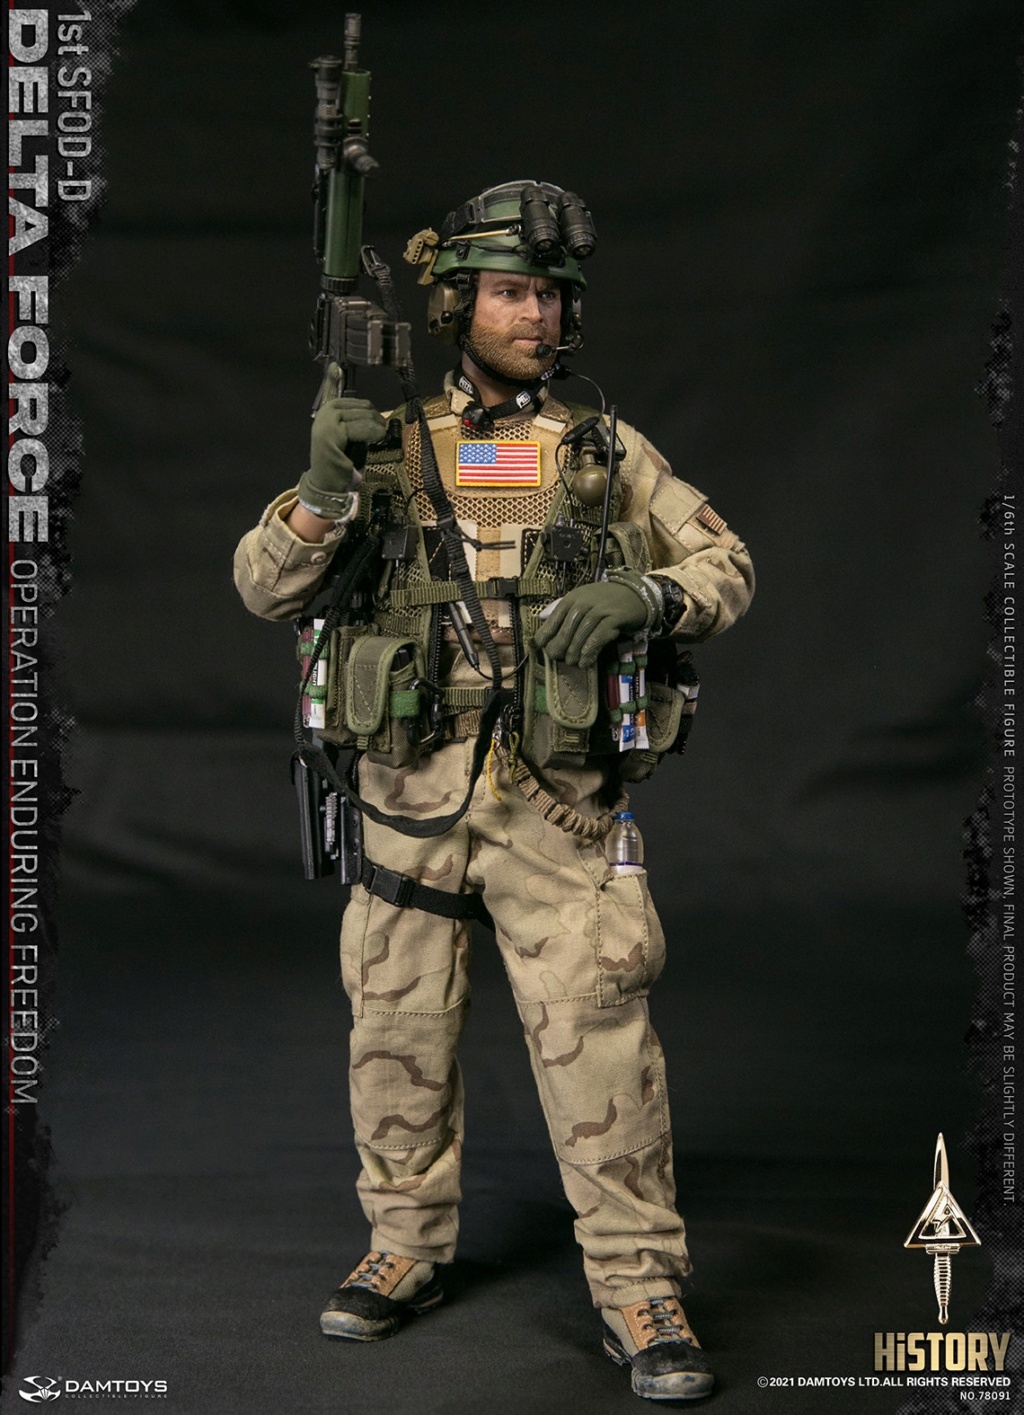 modernmilitary - NEW PRODUCT: DAMTOYS: 1/6 Delta Forces 1st SFOD-D Operation Enduring Freedom #78091 10515110